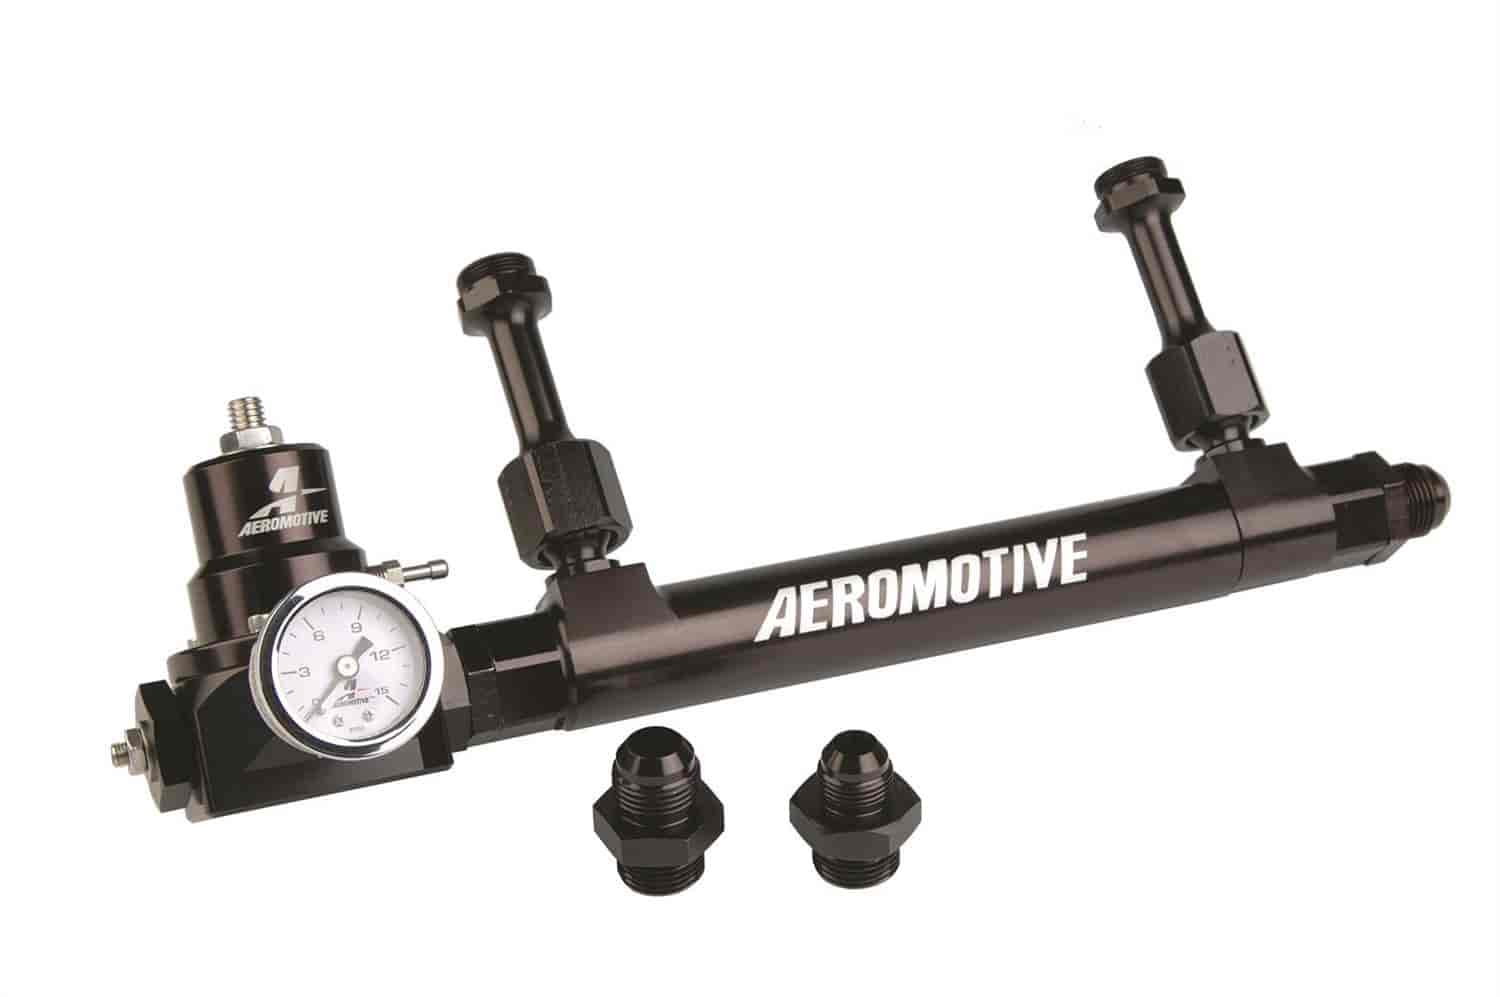 Adjustable Fuel Log Kit for Demon Carbs Includes double adjustable bypass regulator, gauge, and fittings